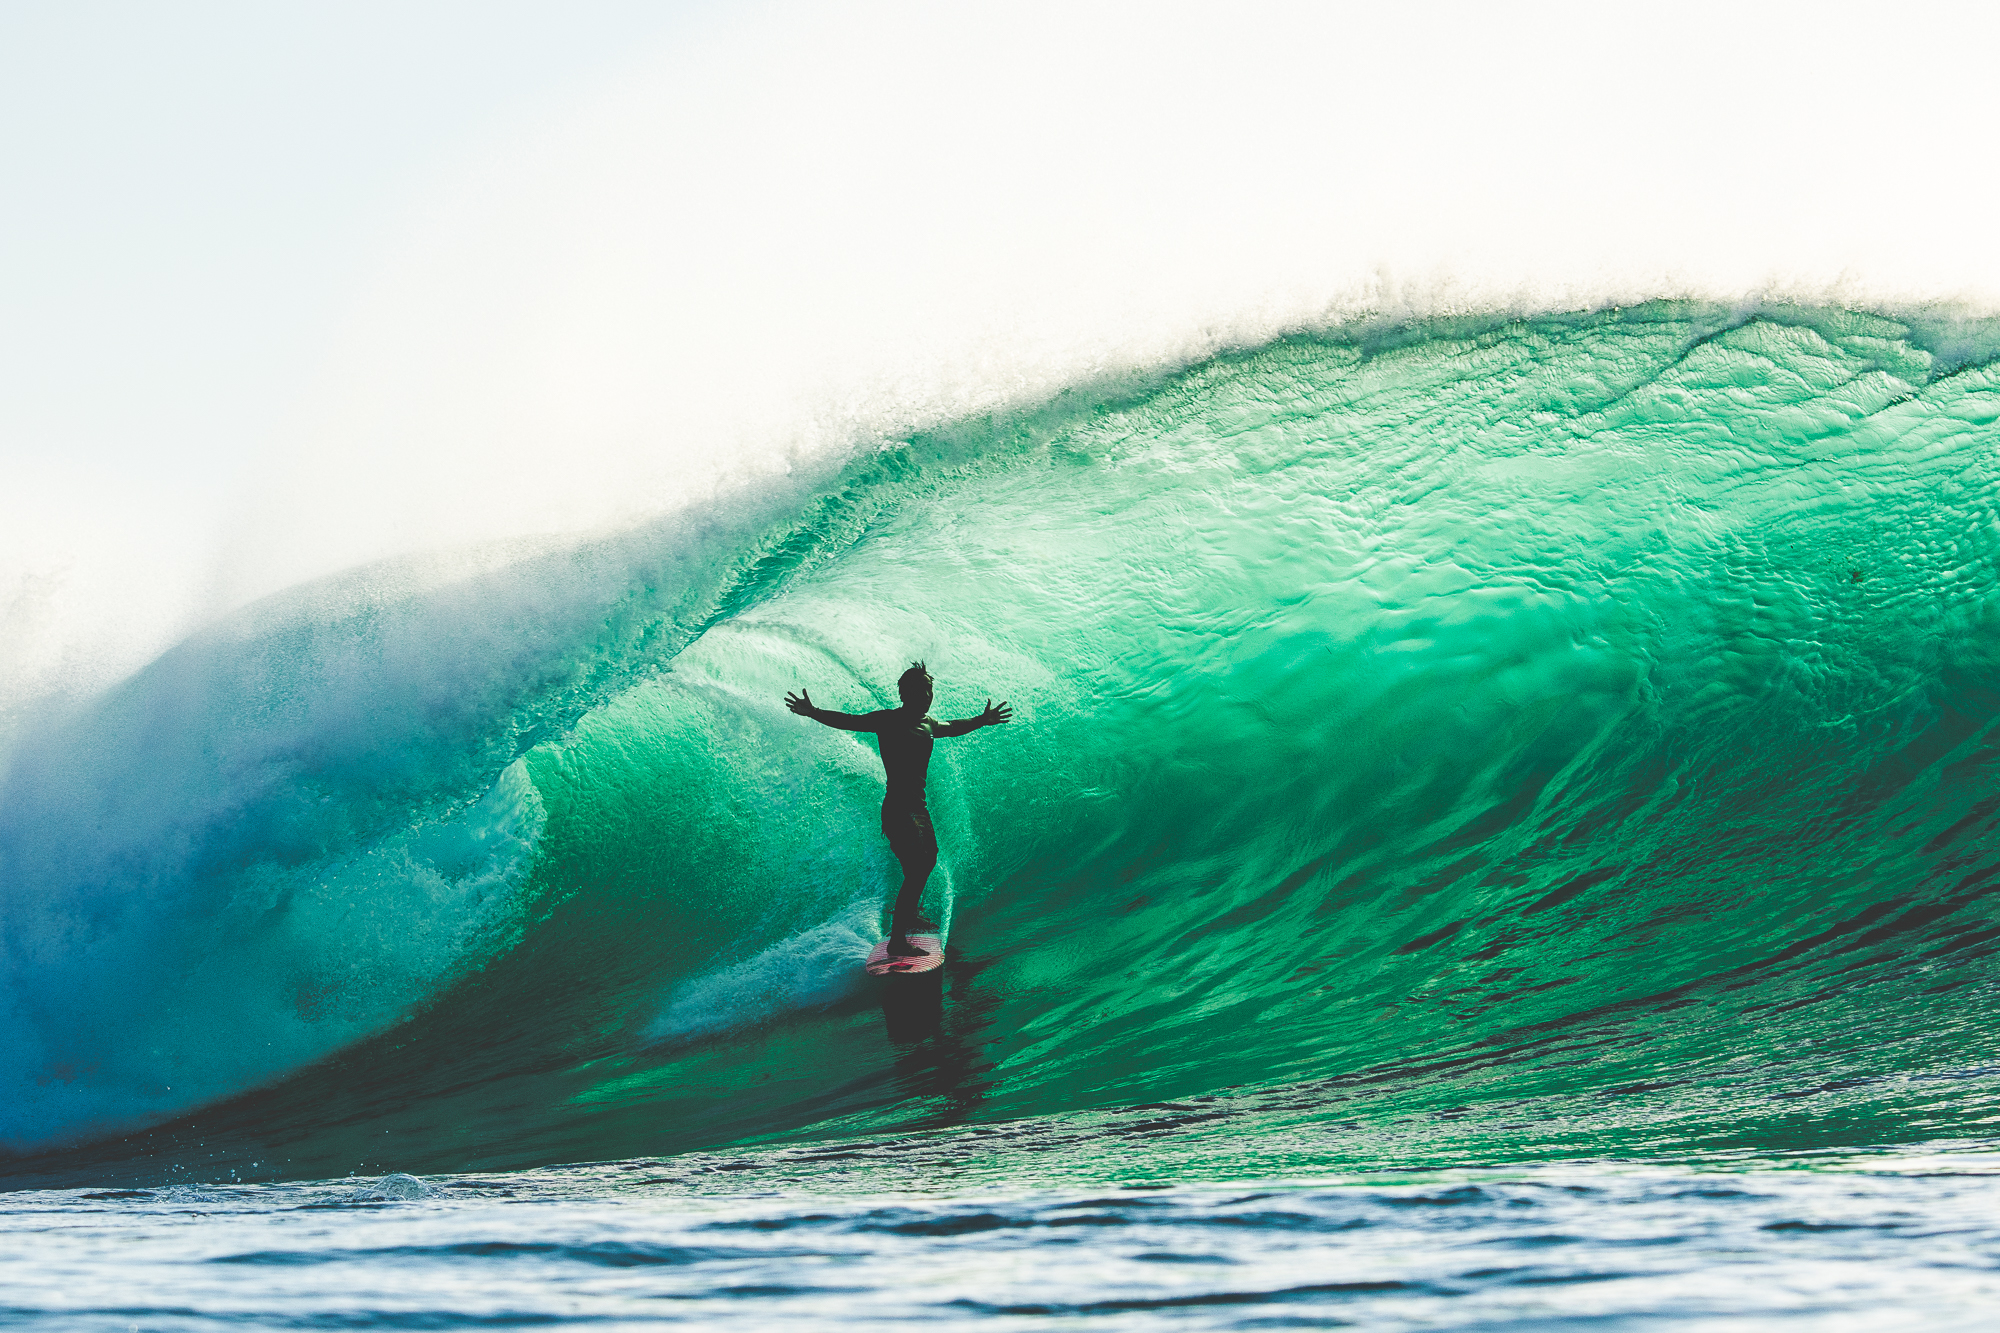 Describe your mood right now So stoked Mega Artana Padang Padang Foto William Zimmermann